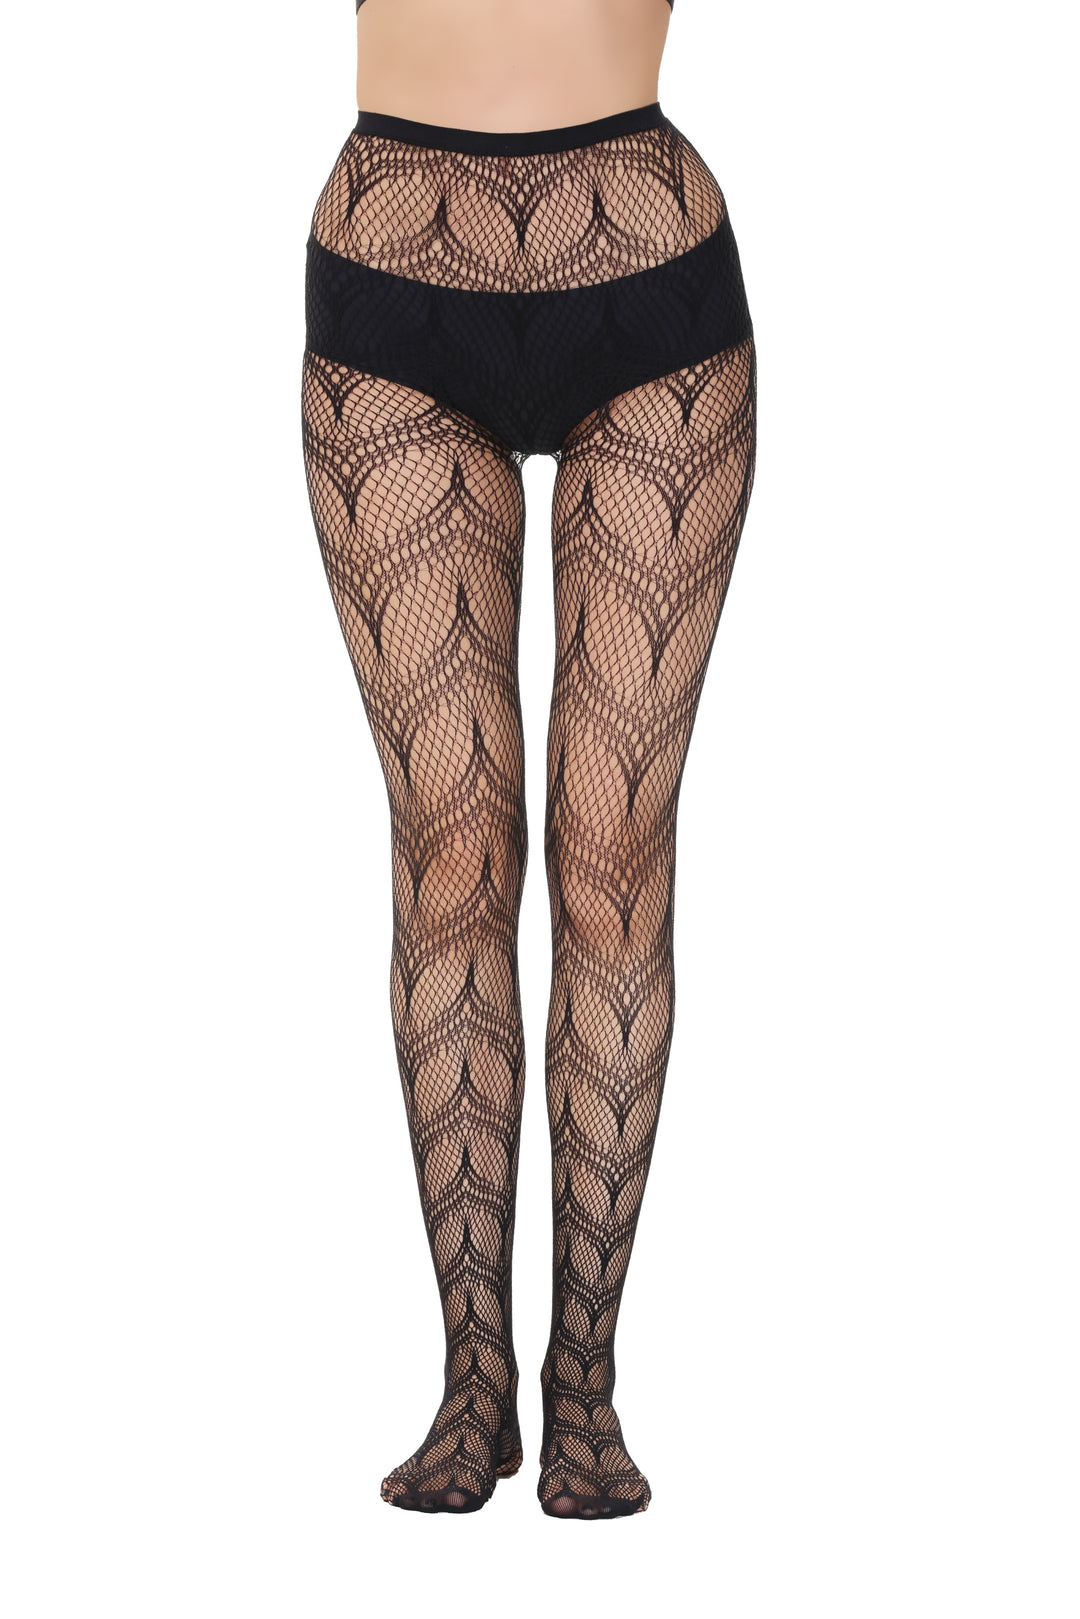 Fishnet Tights 110993-2 Front